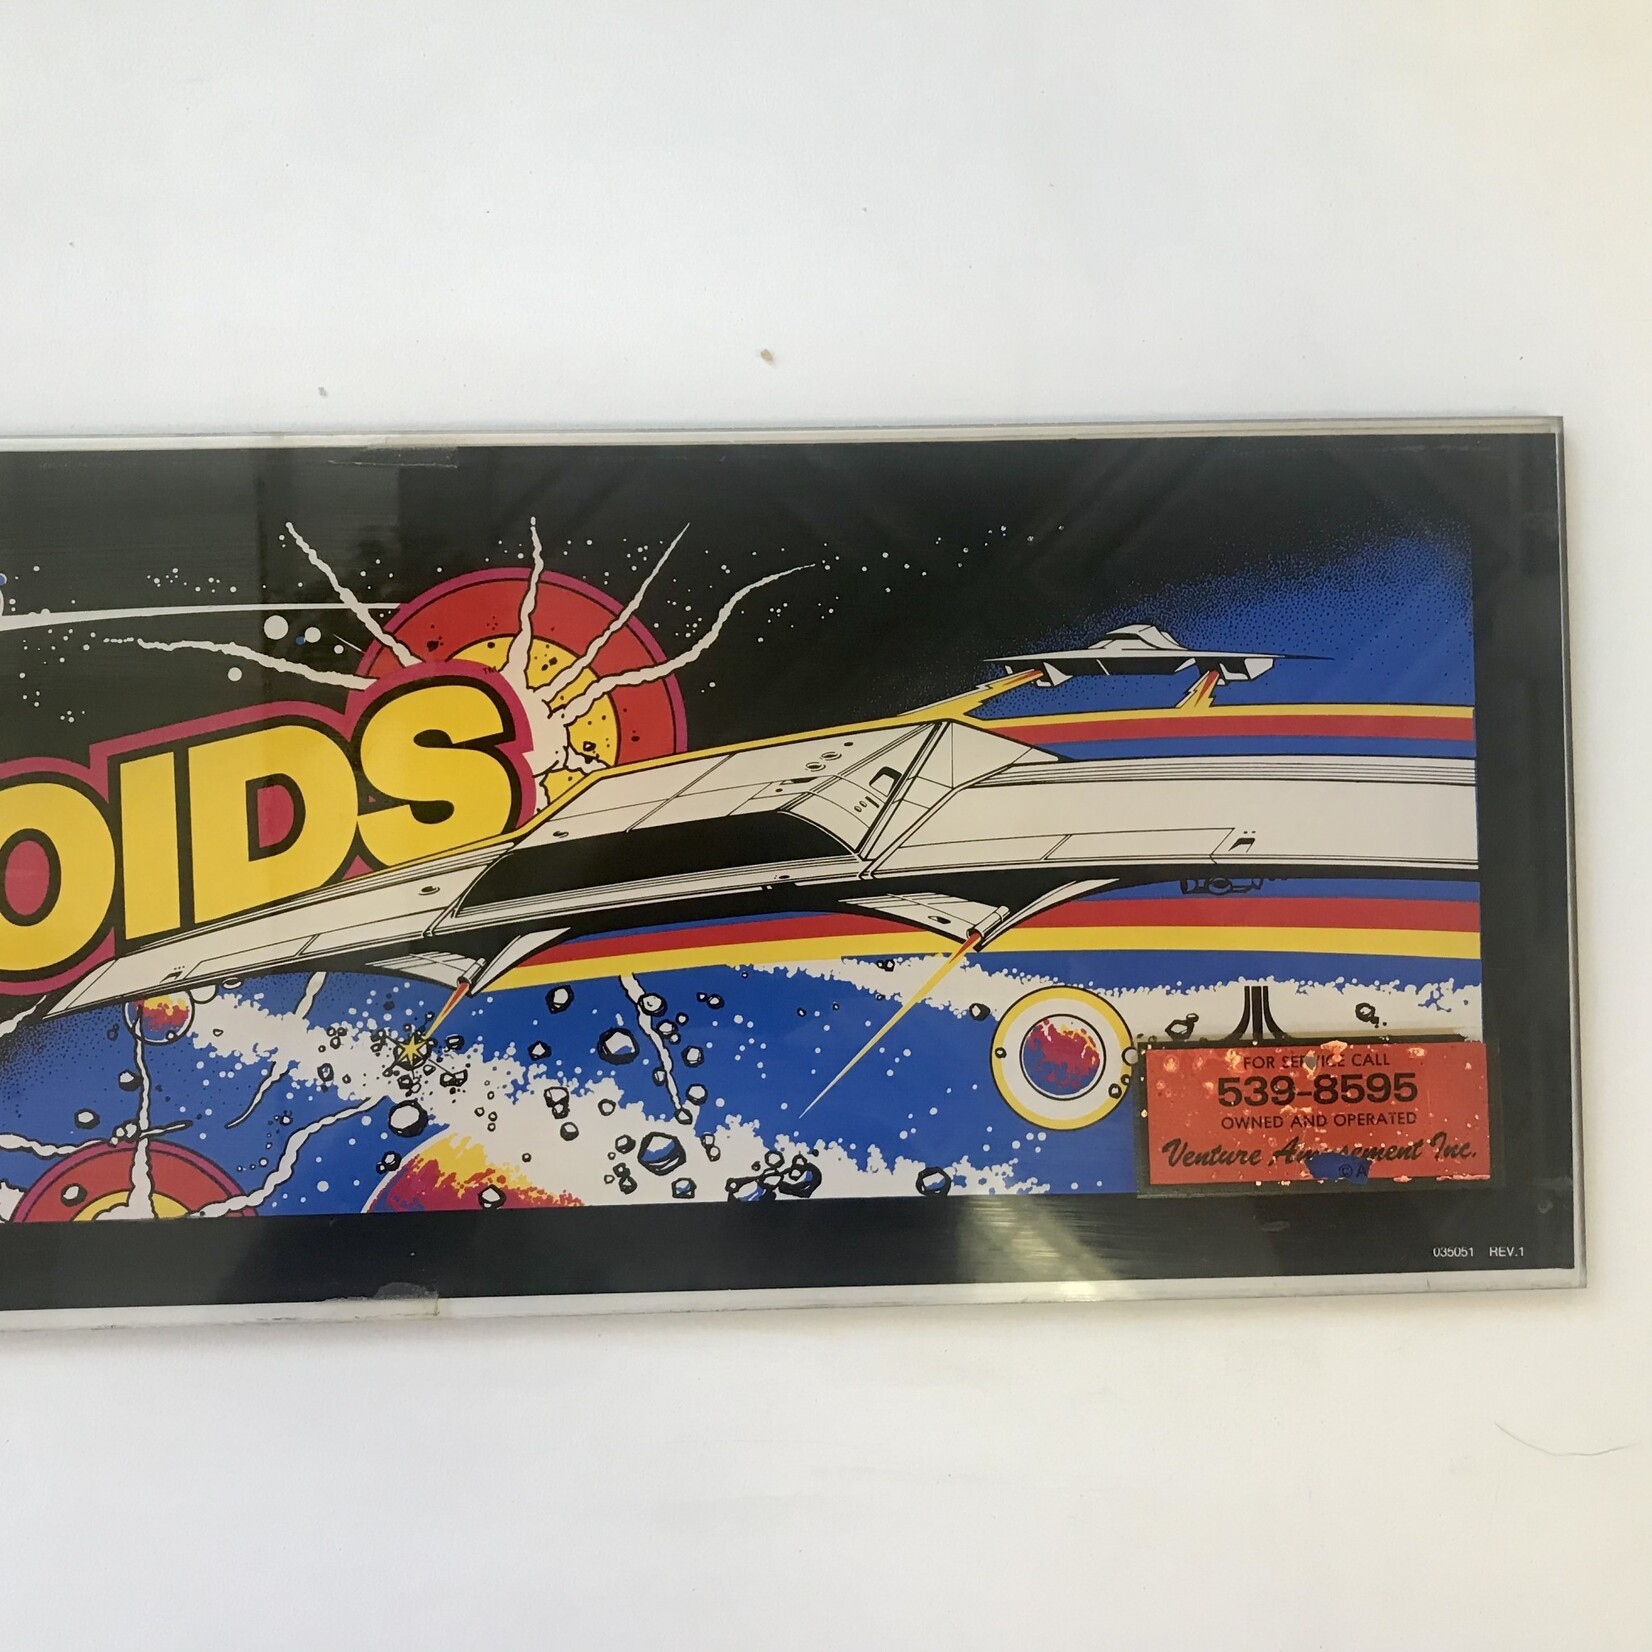 Asteroids - Arcade Game Marquee (USED)